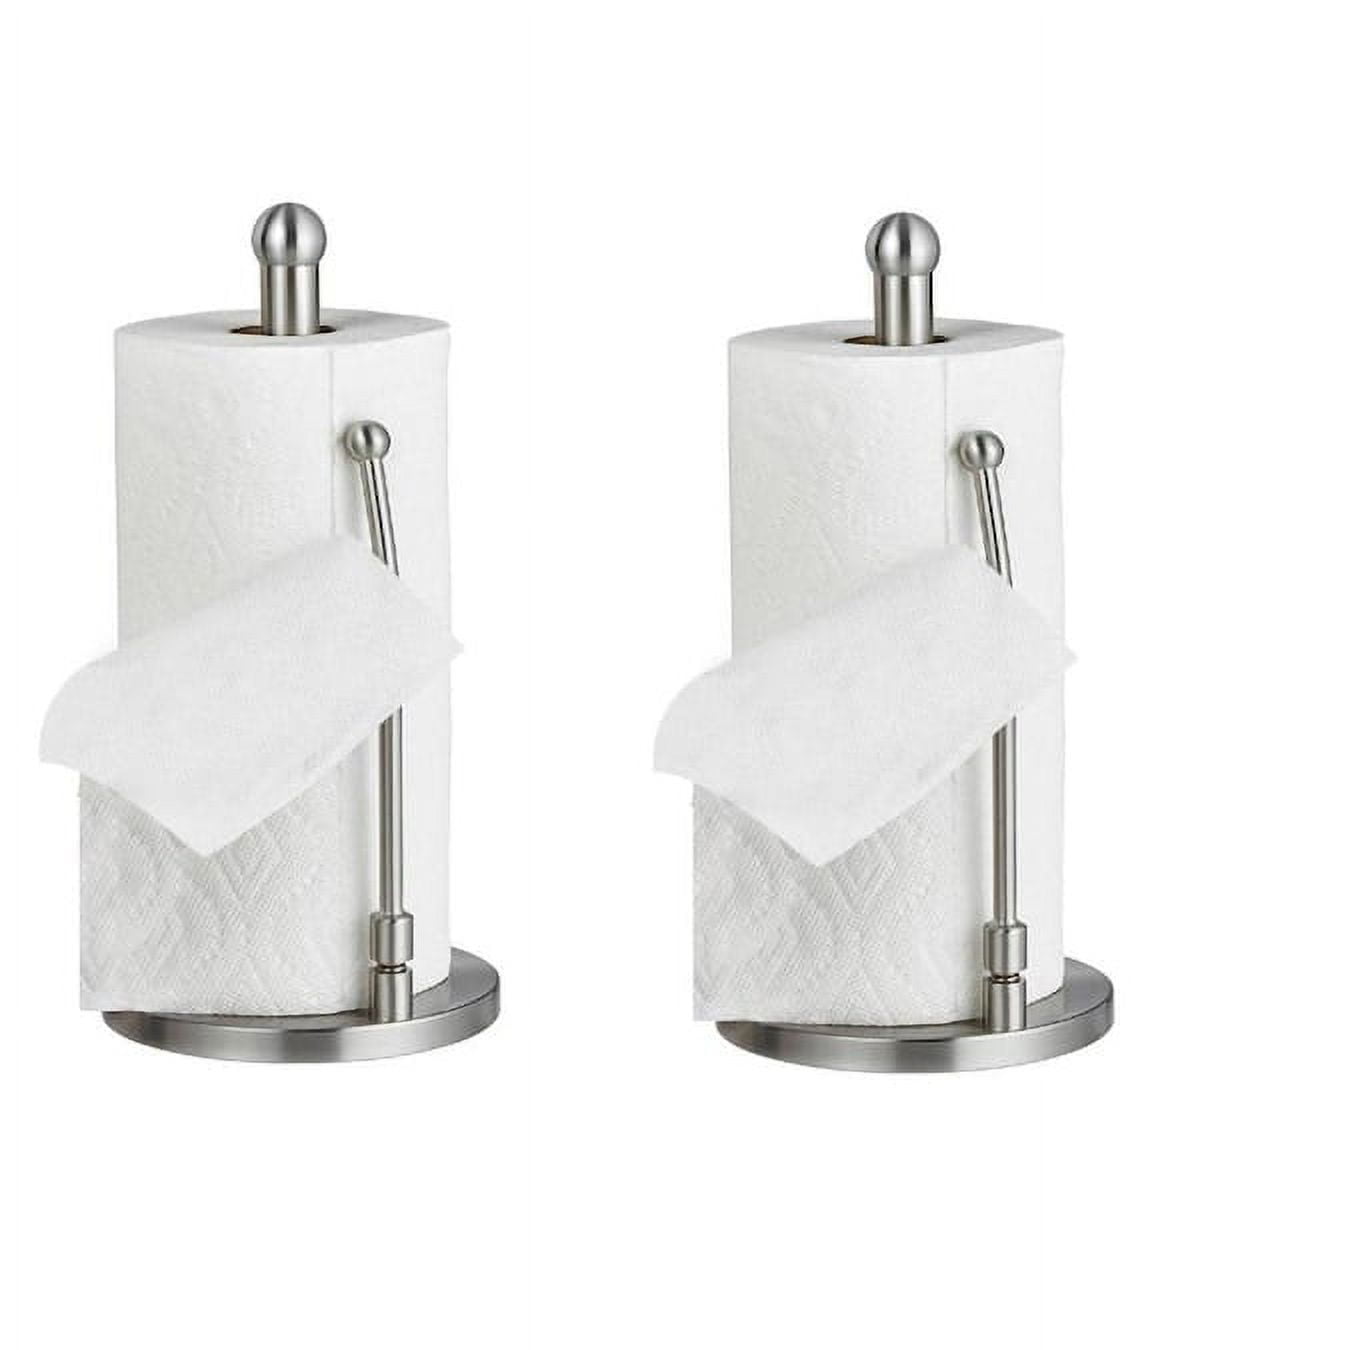 Paper Towel Holder Countertop, Stainless Steel Standing Paper